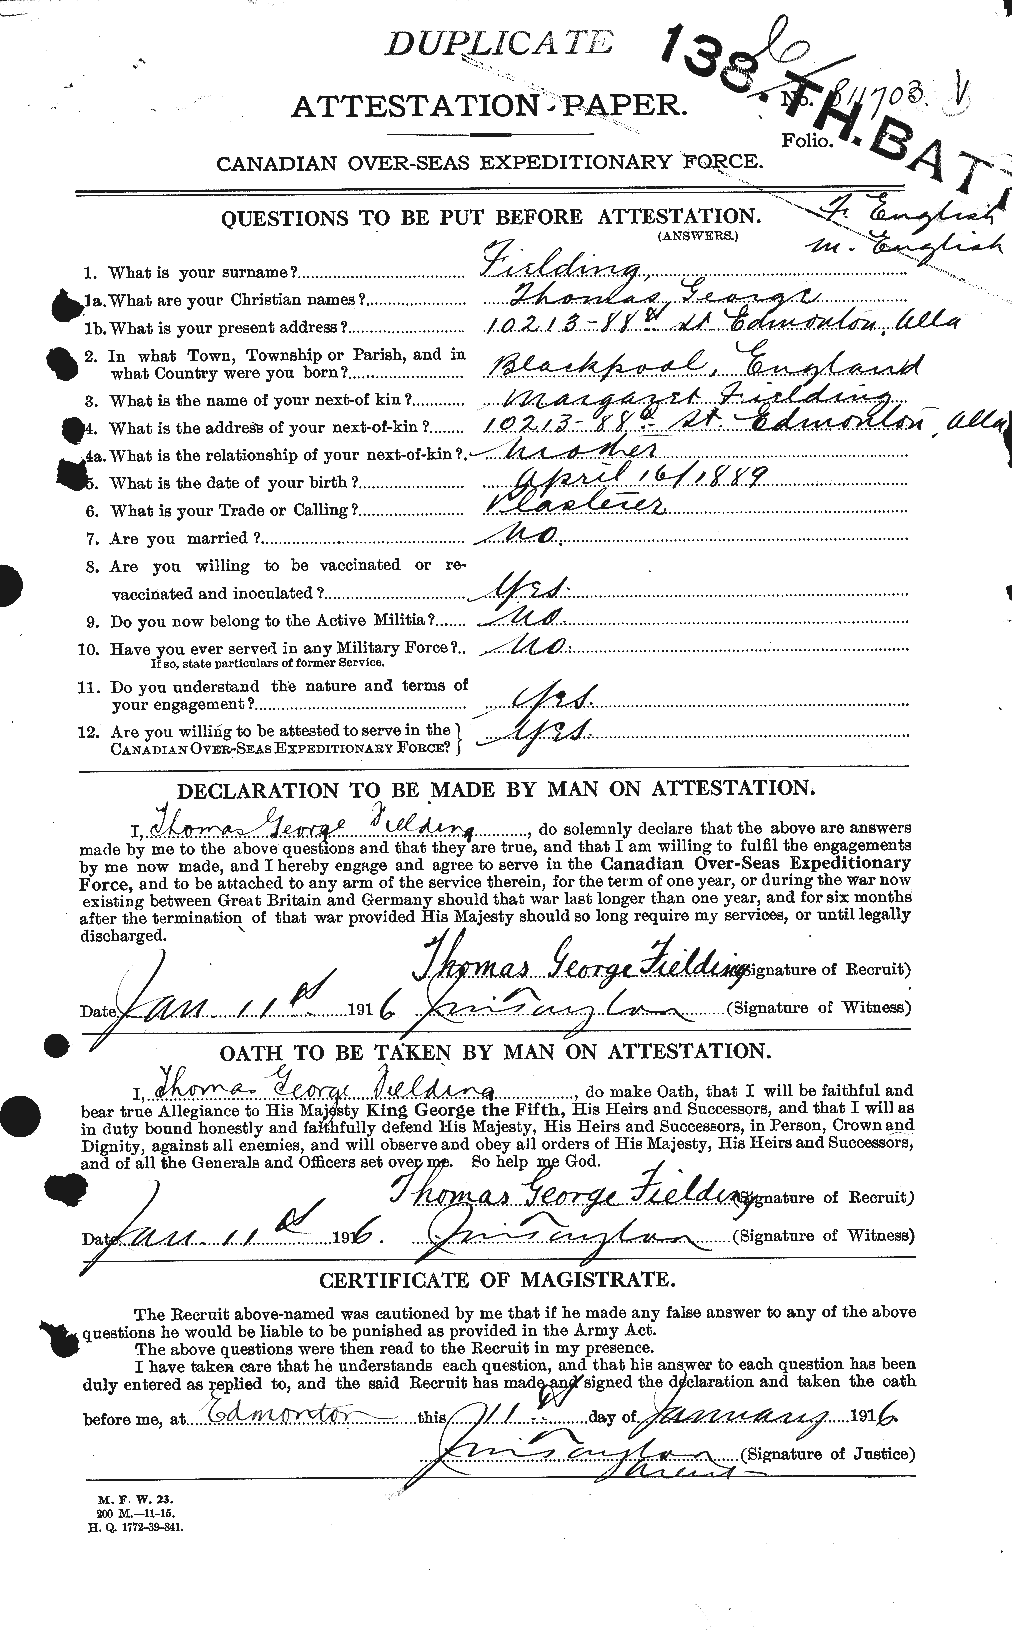 Personnel Records of the First World War - CEF 320955a